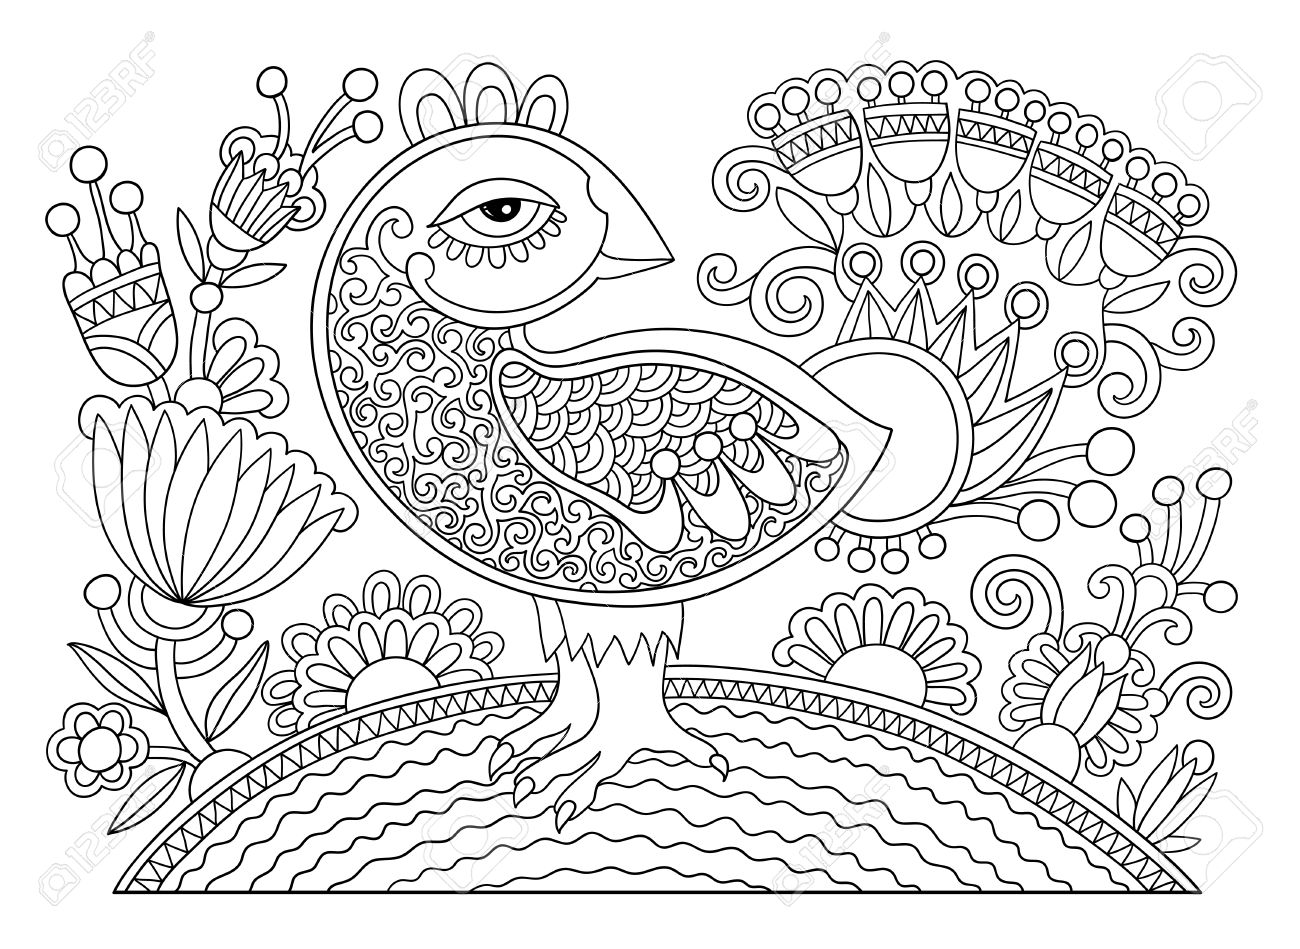 White Peafowl coloring #12, Download drawings